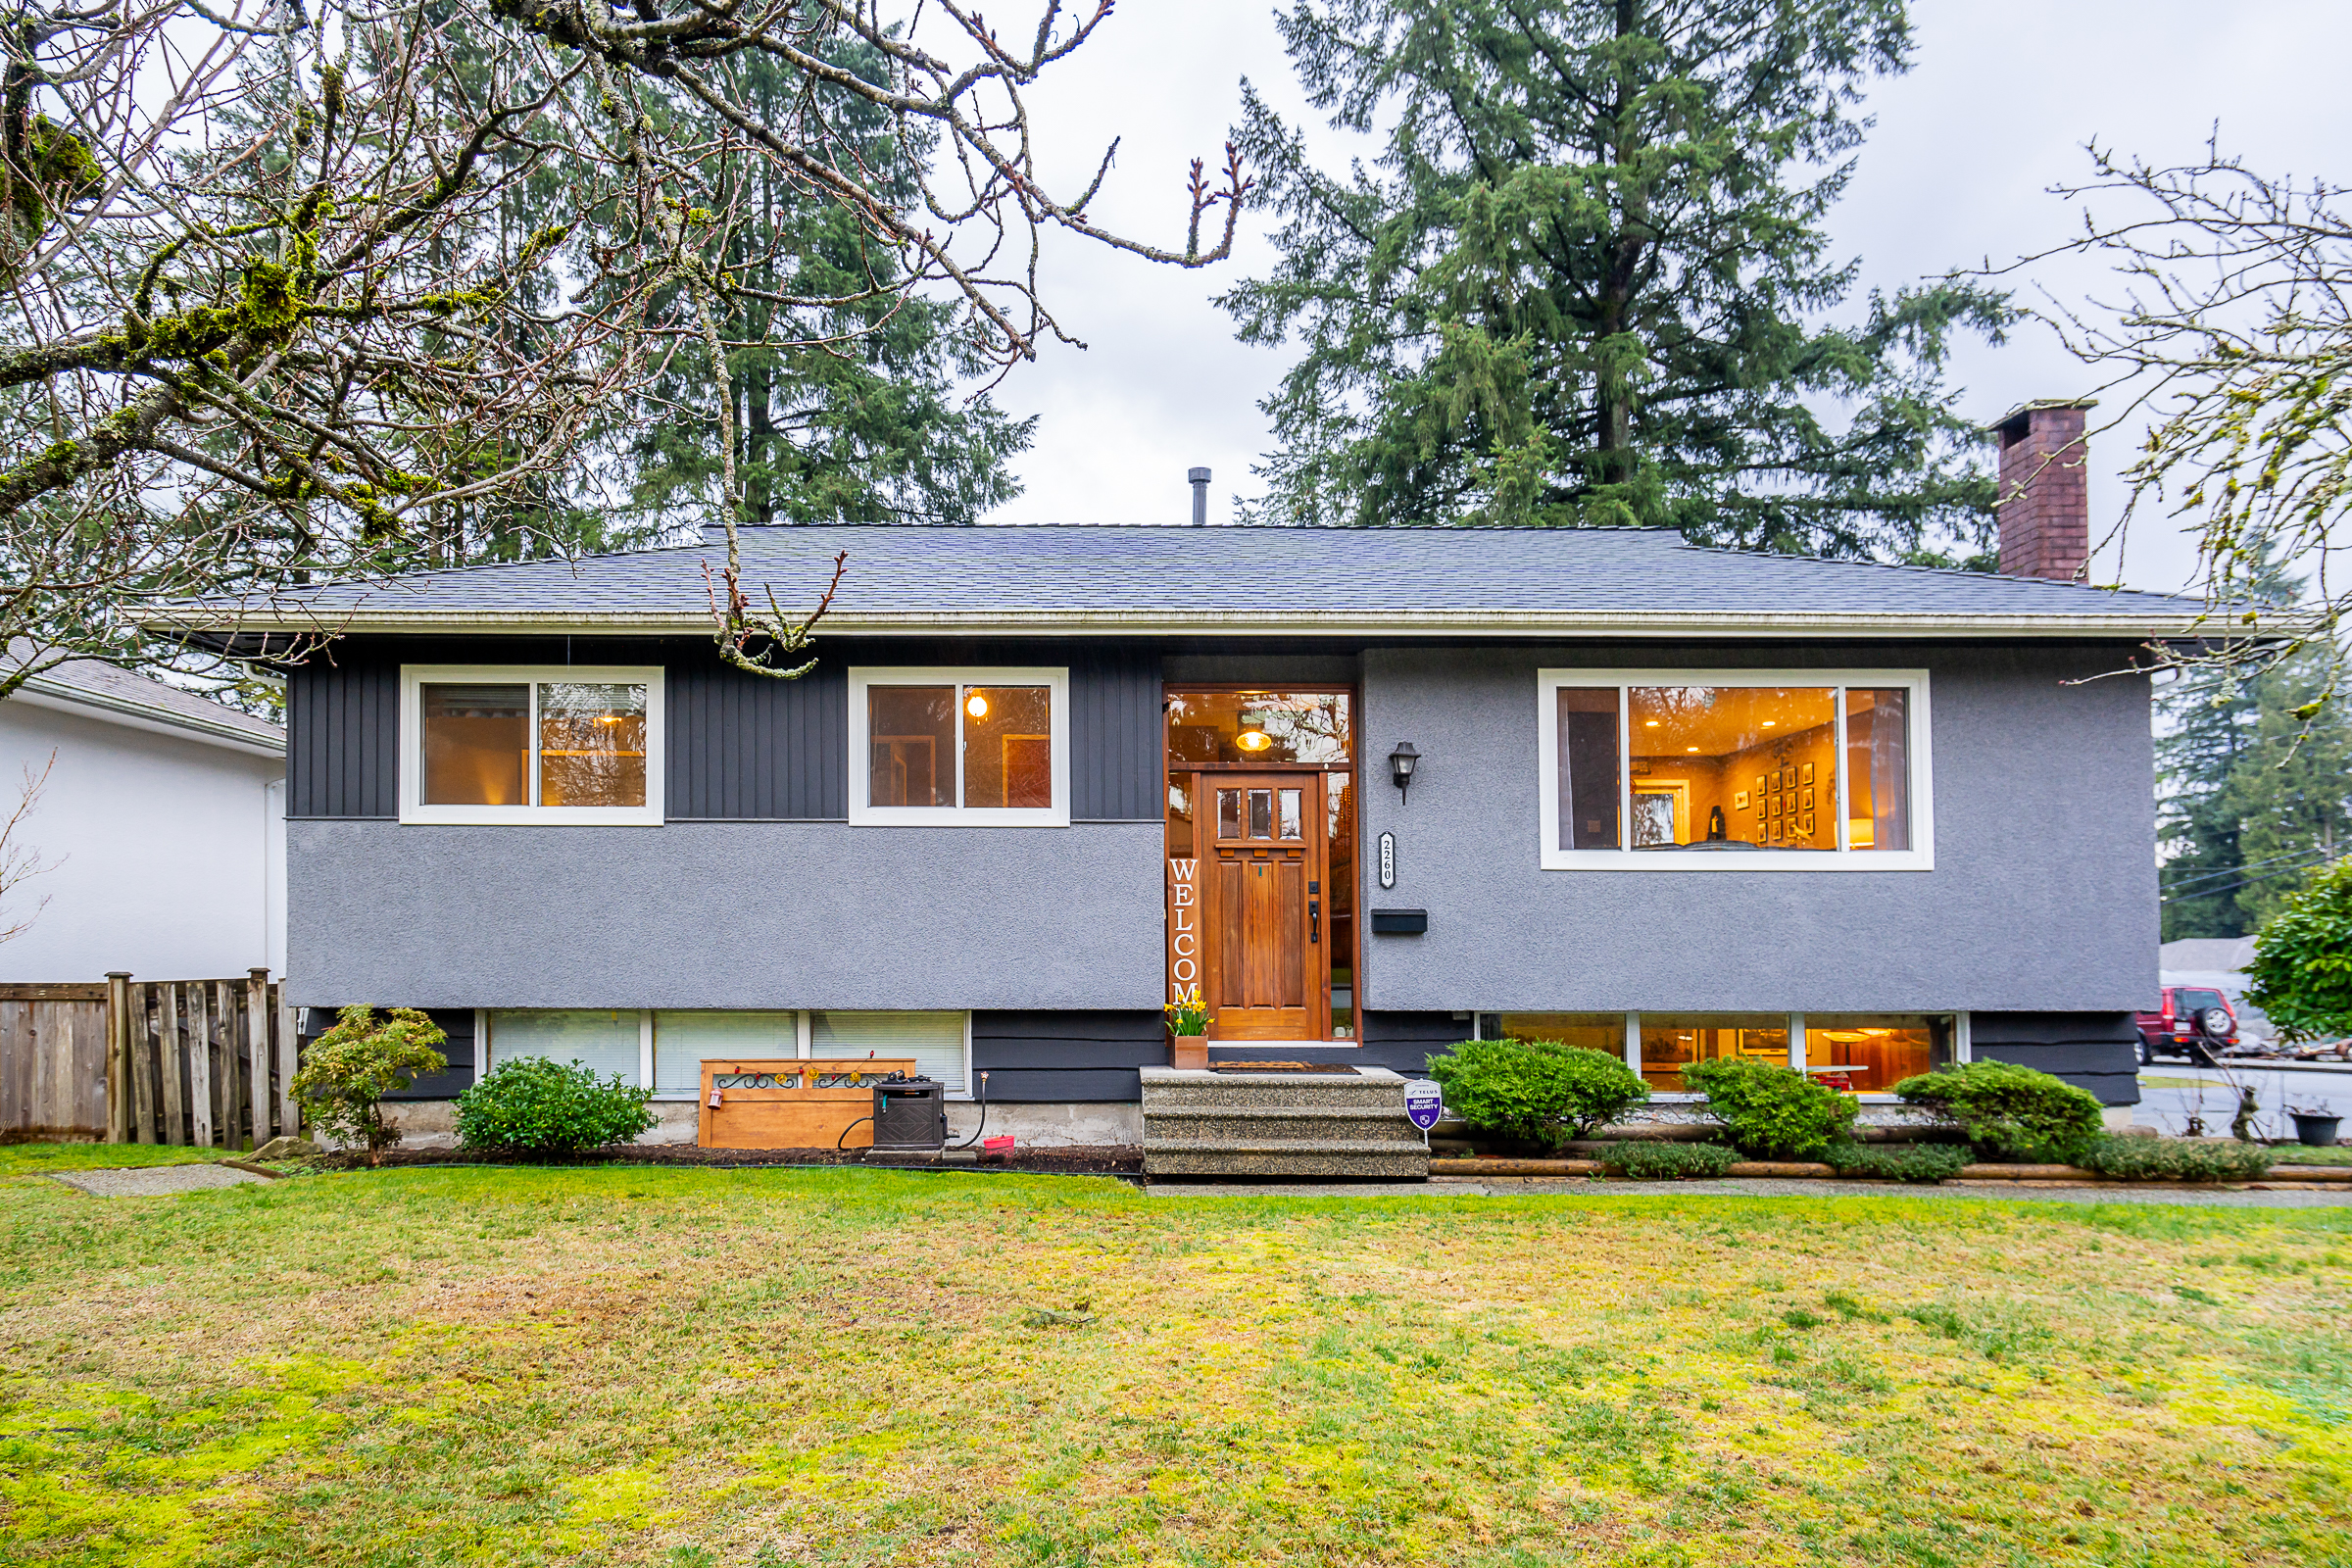 Selling a House in Central Coquitlam 2260 Portage Avenue Coquitlam Realtor Krista Lapp